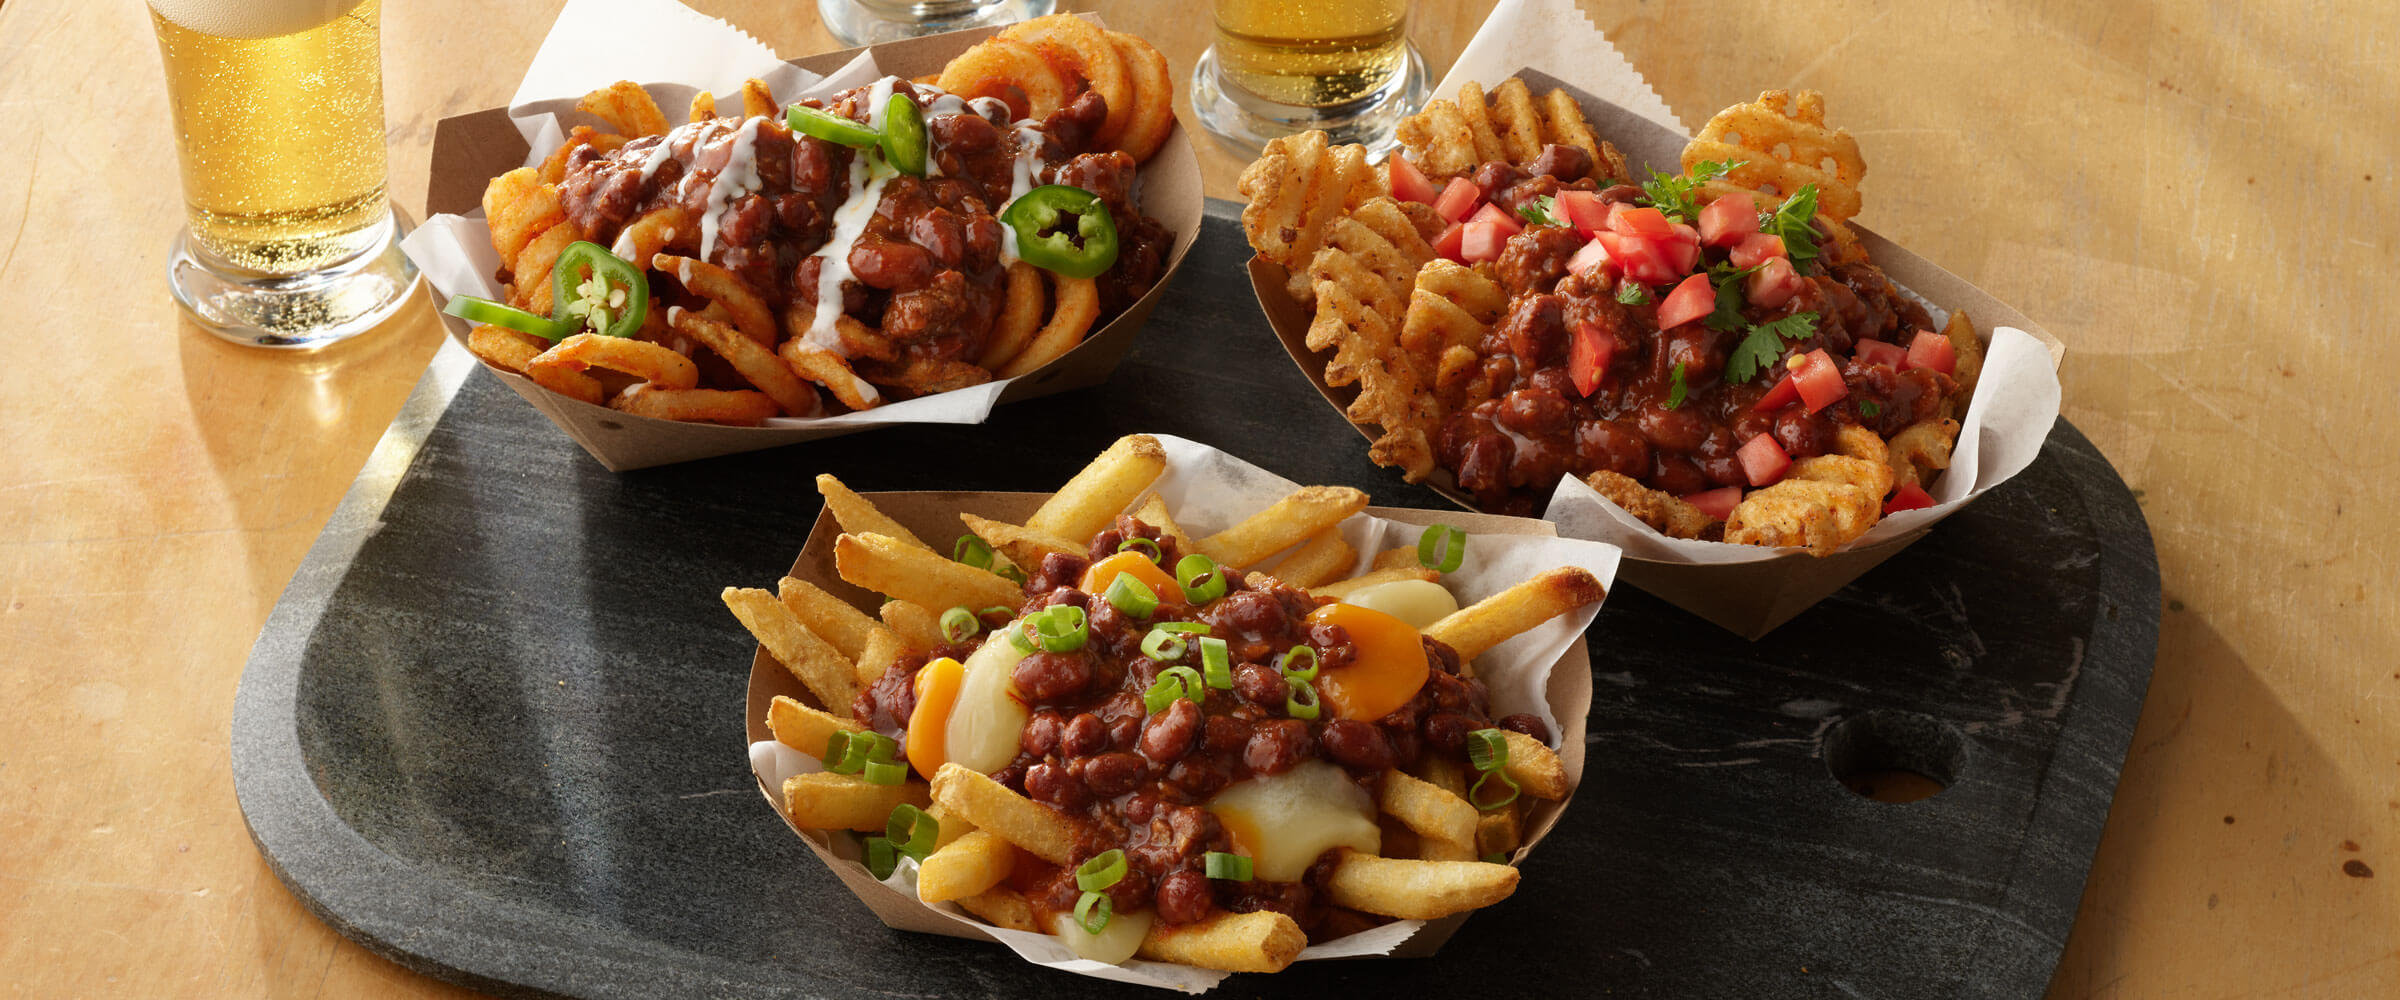 Chili Poutine 3 Ways topped with salsa, green onions and sauce in brown paper baskets with drinks on the side